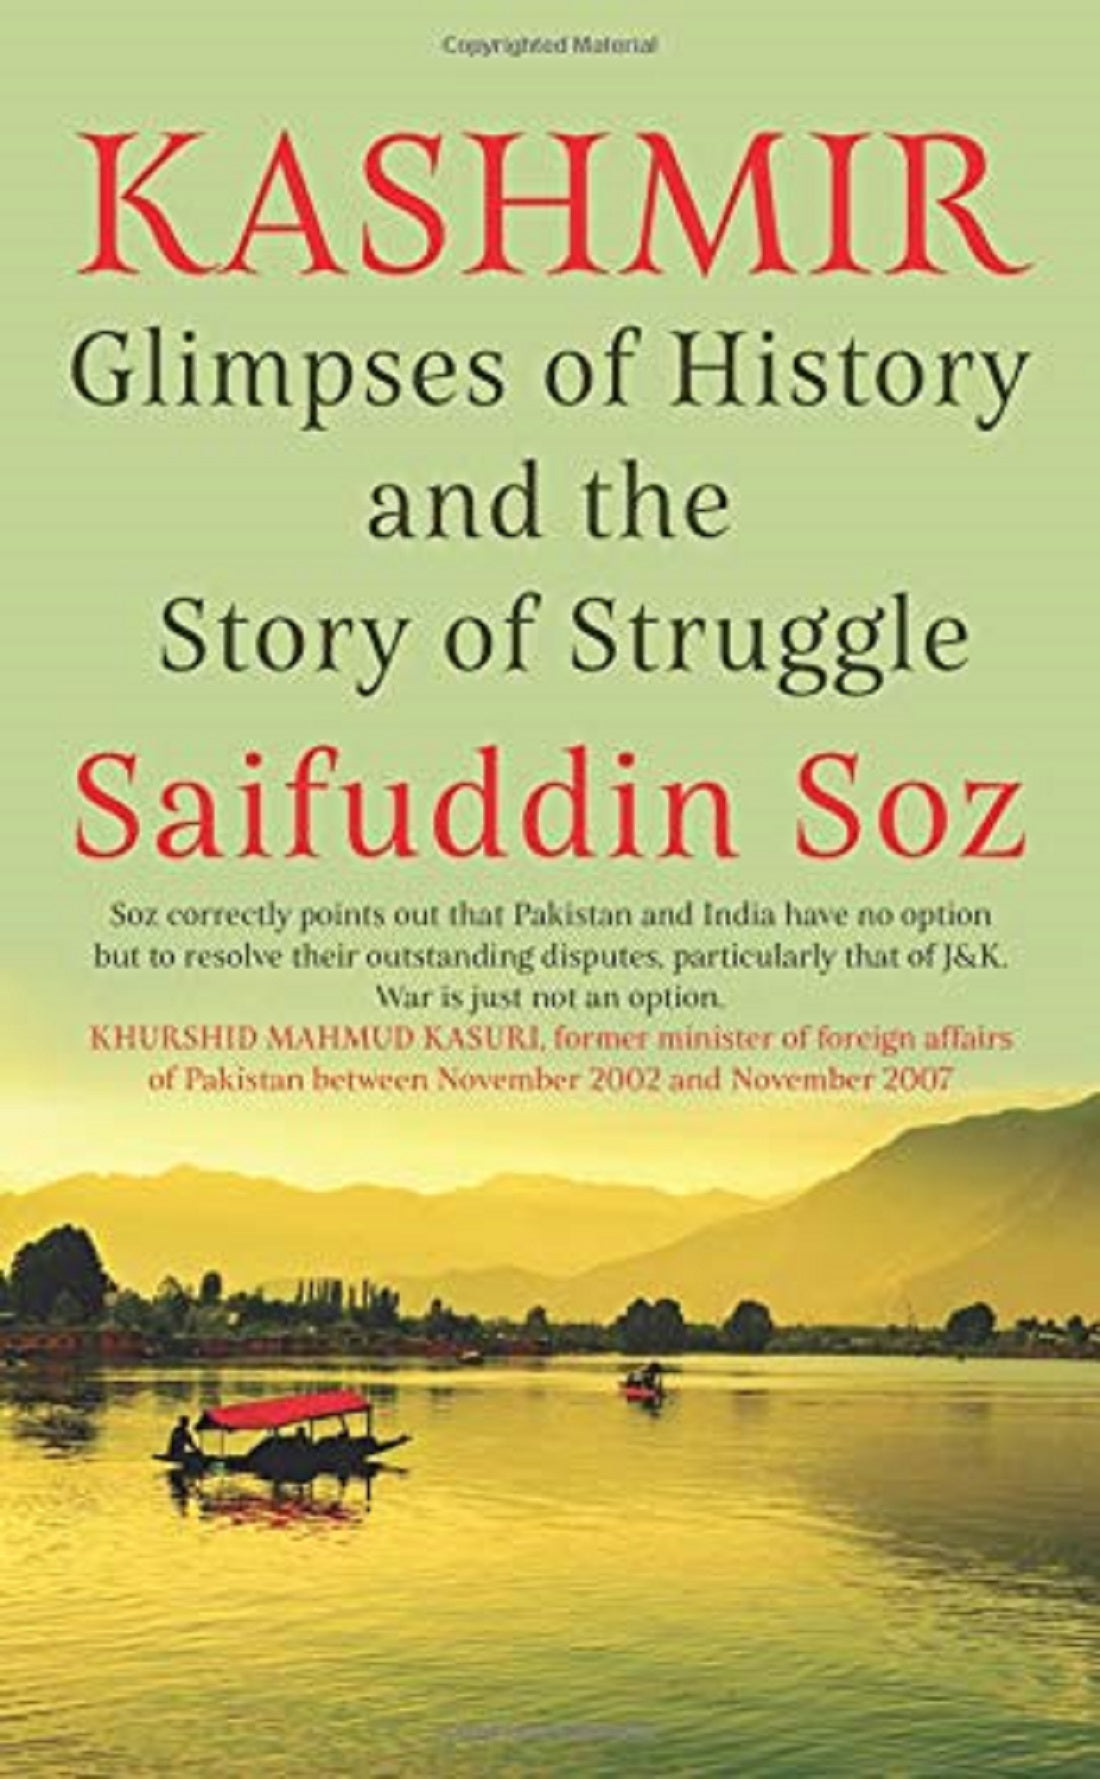 KASHMIR GLIMPSES OF HISTORY AND THE STORY OF STRUGGLE